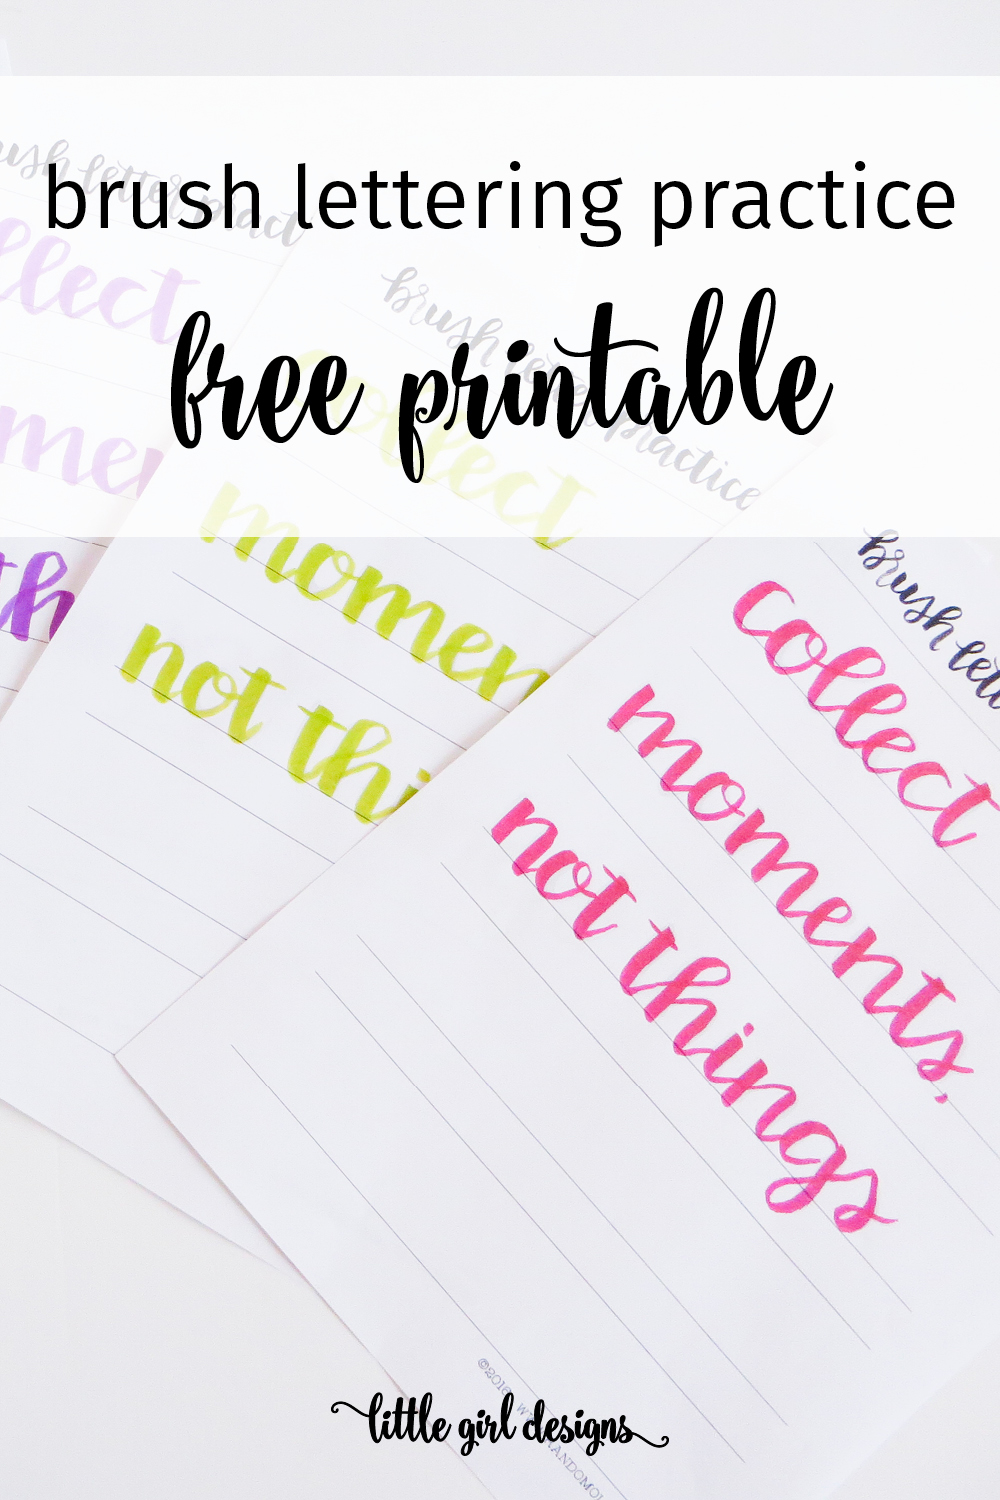 Join me and learn brush lettering with this free practice sheet, thanks to Random Olive!